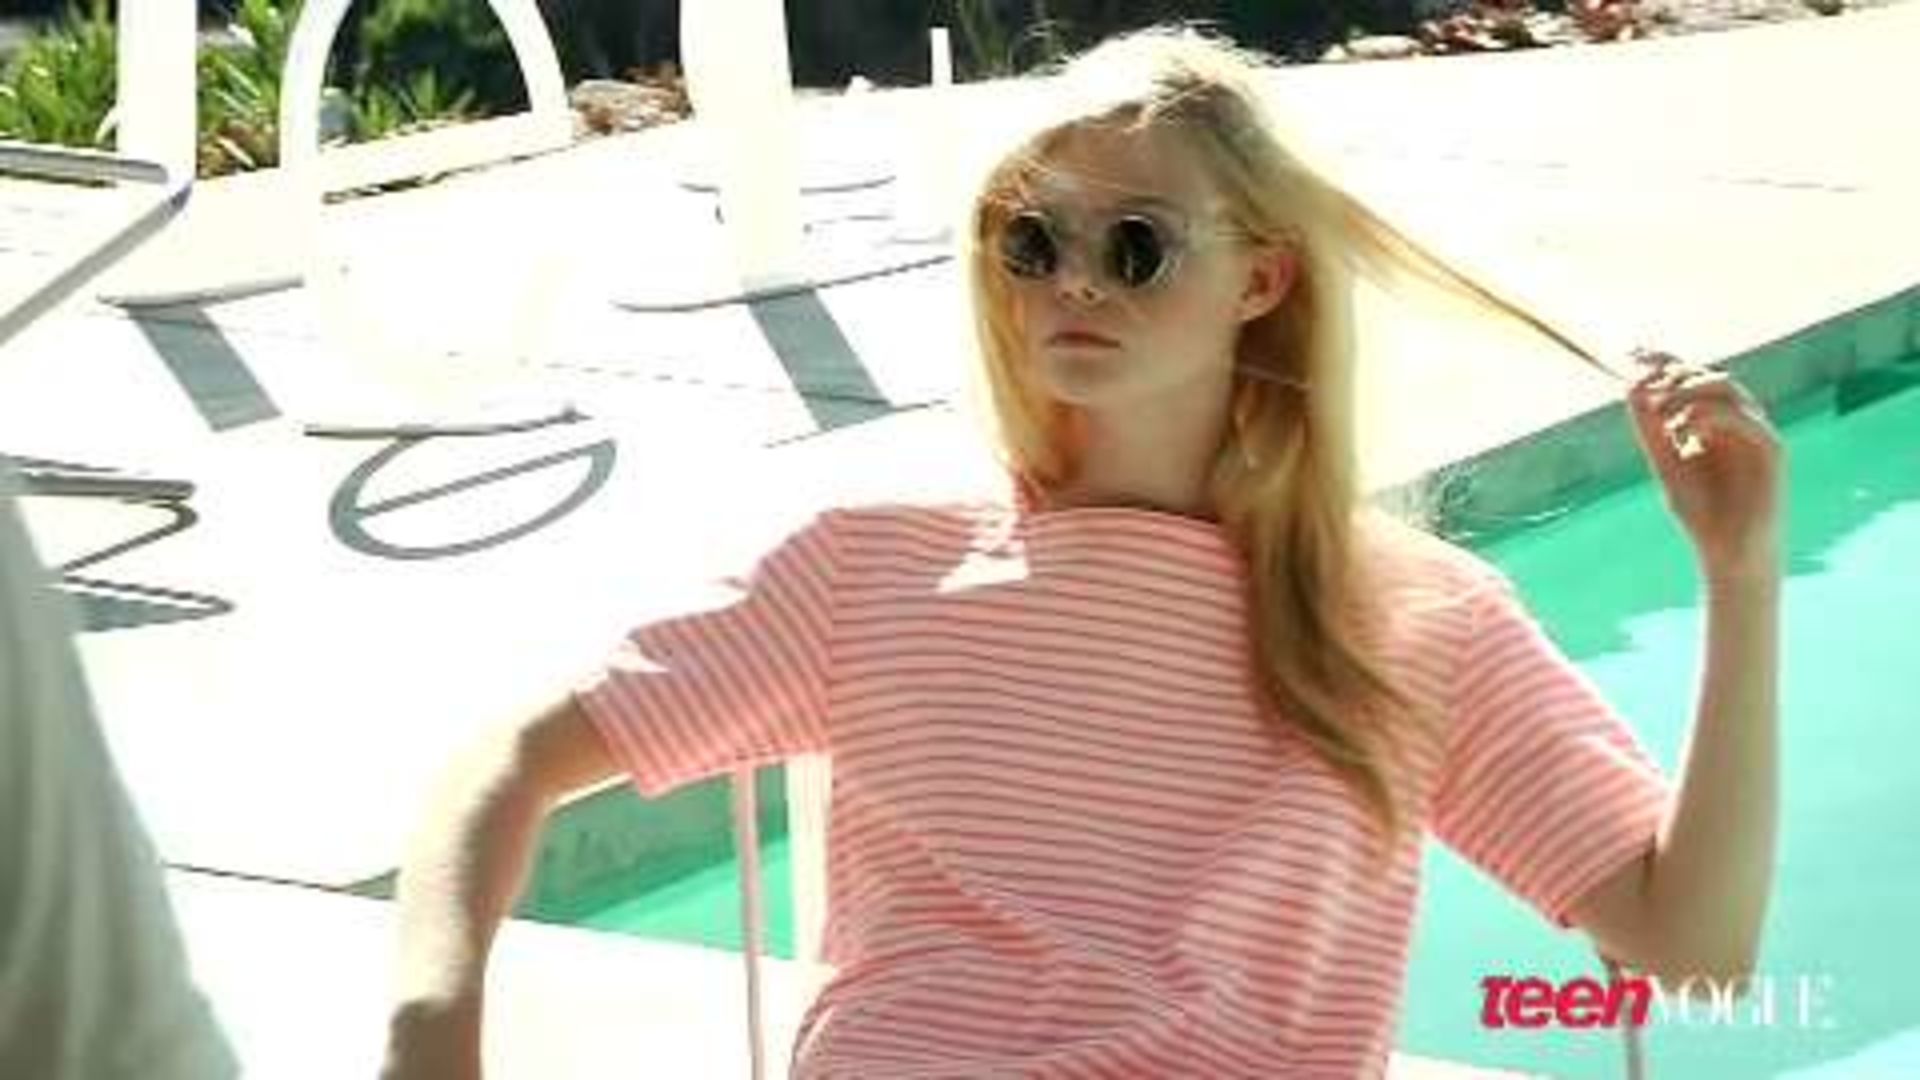 Elle Fanning Covers 'Vogue' Magazine for the First Time